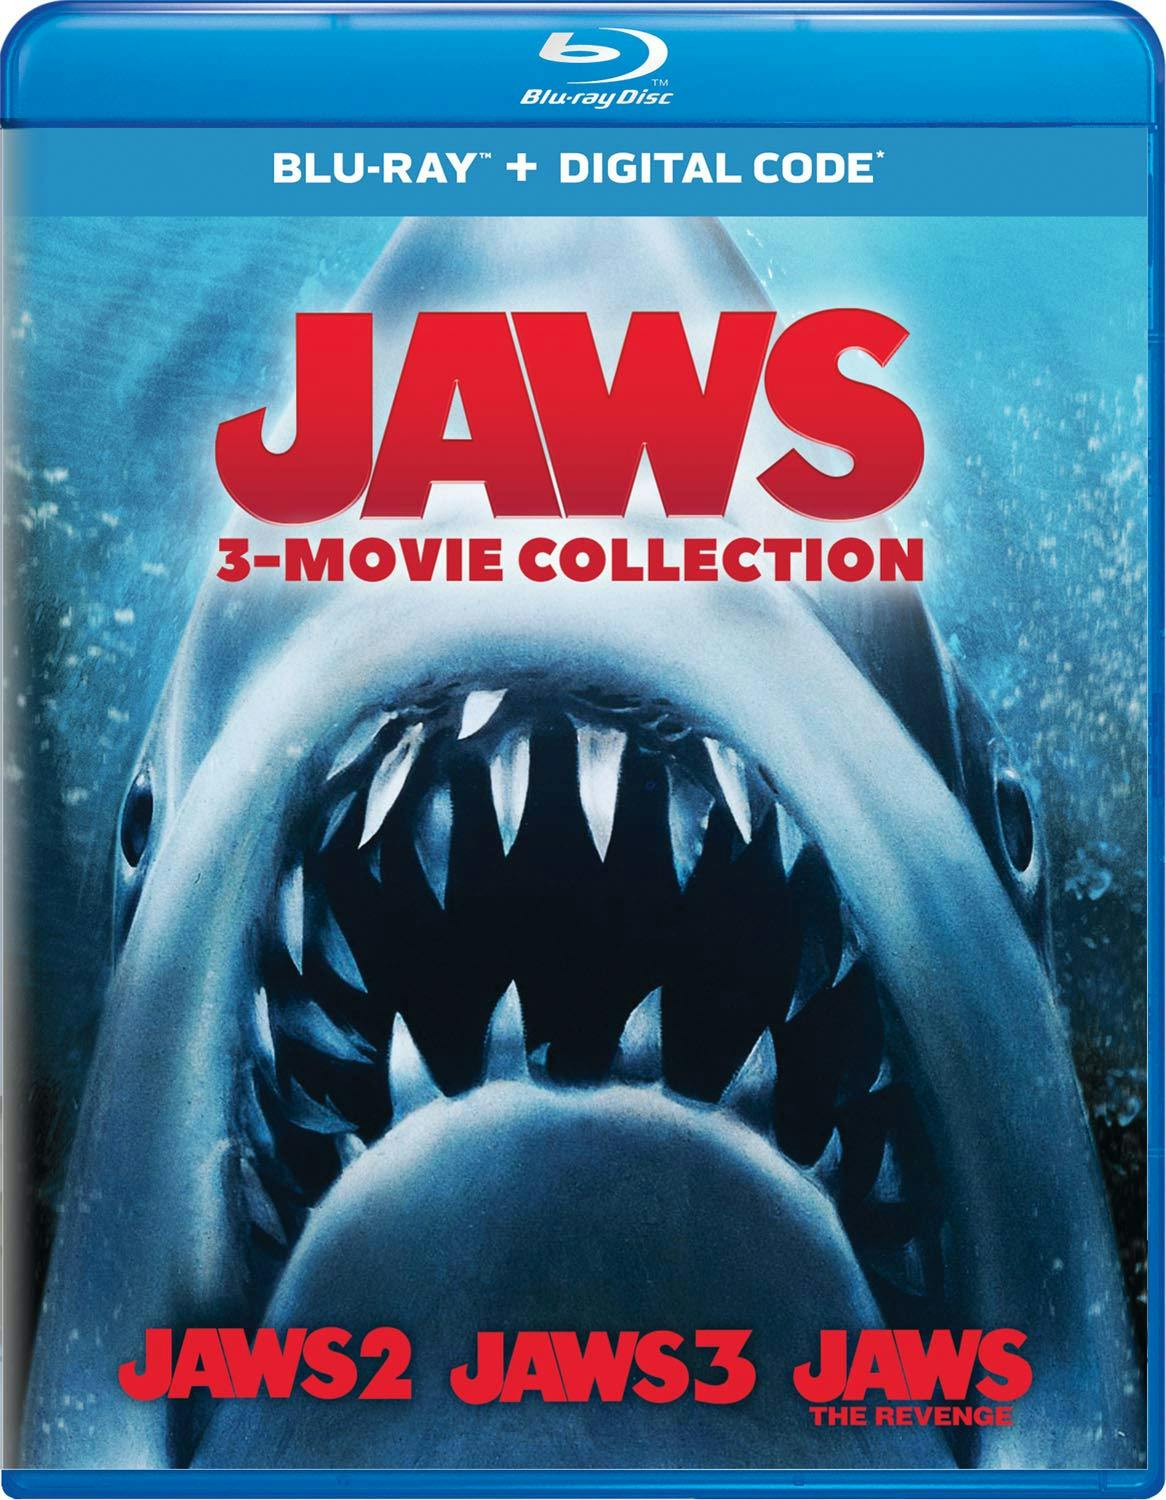 Triple The Value - Blu-ray Deals on 3 Movie Collections